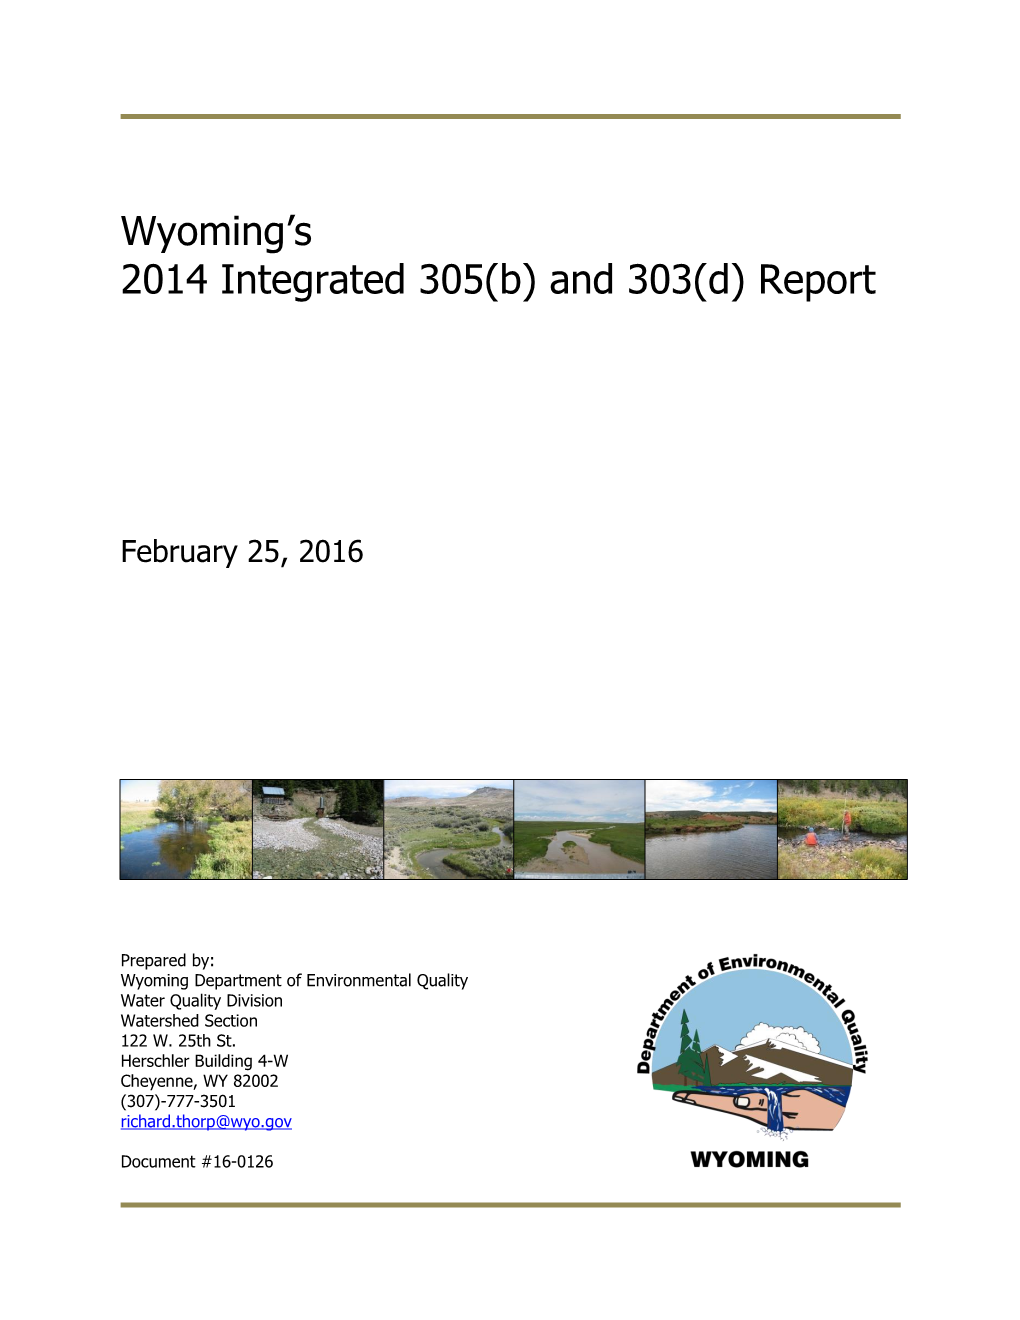 Wyoming's 2014 Integrated 305(B) and 303(D)